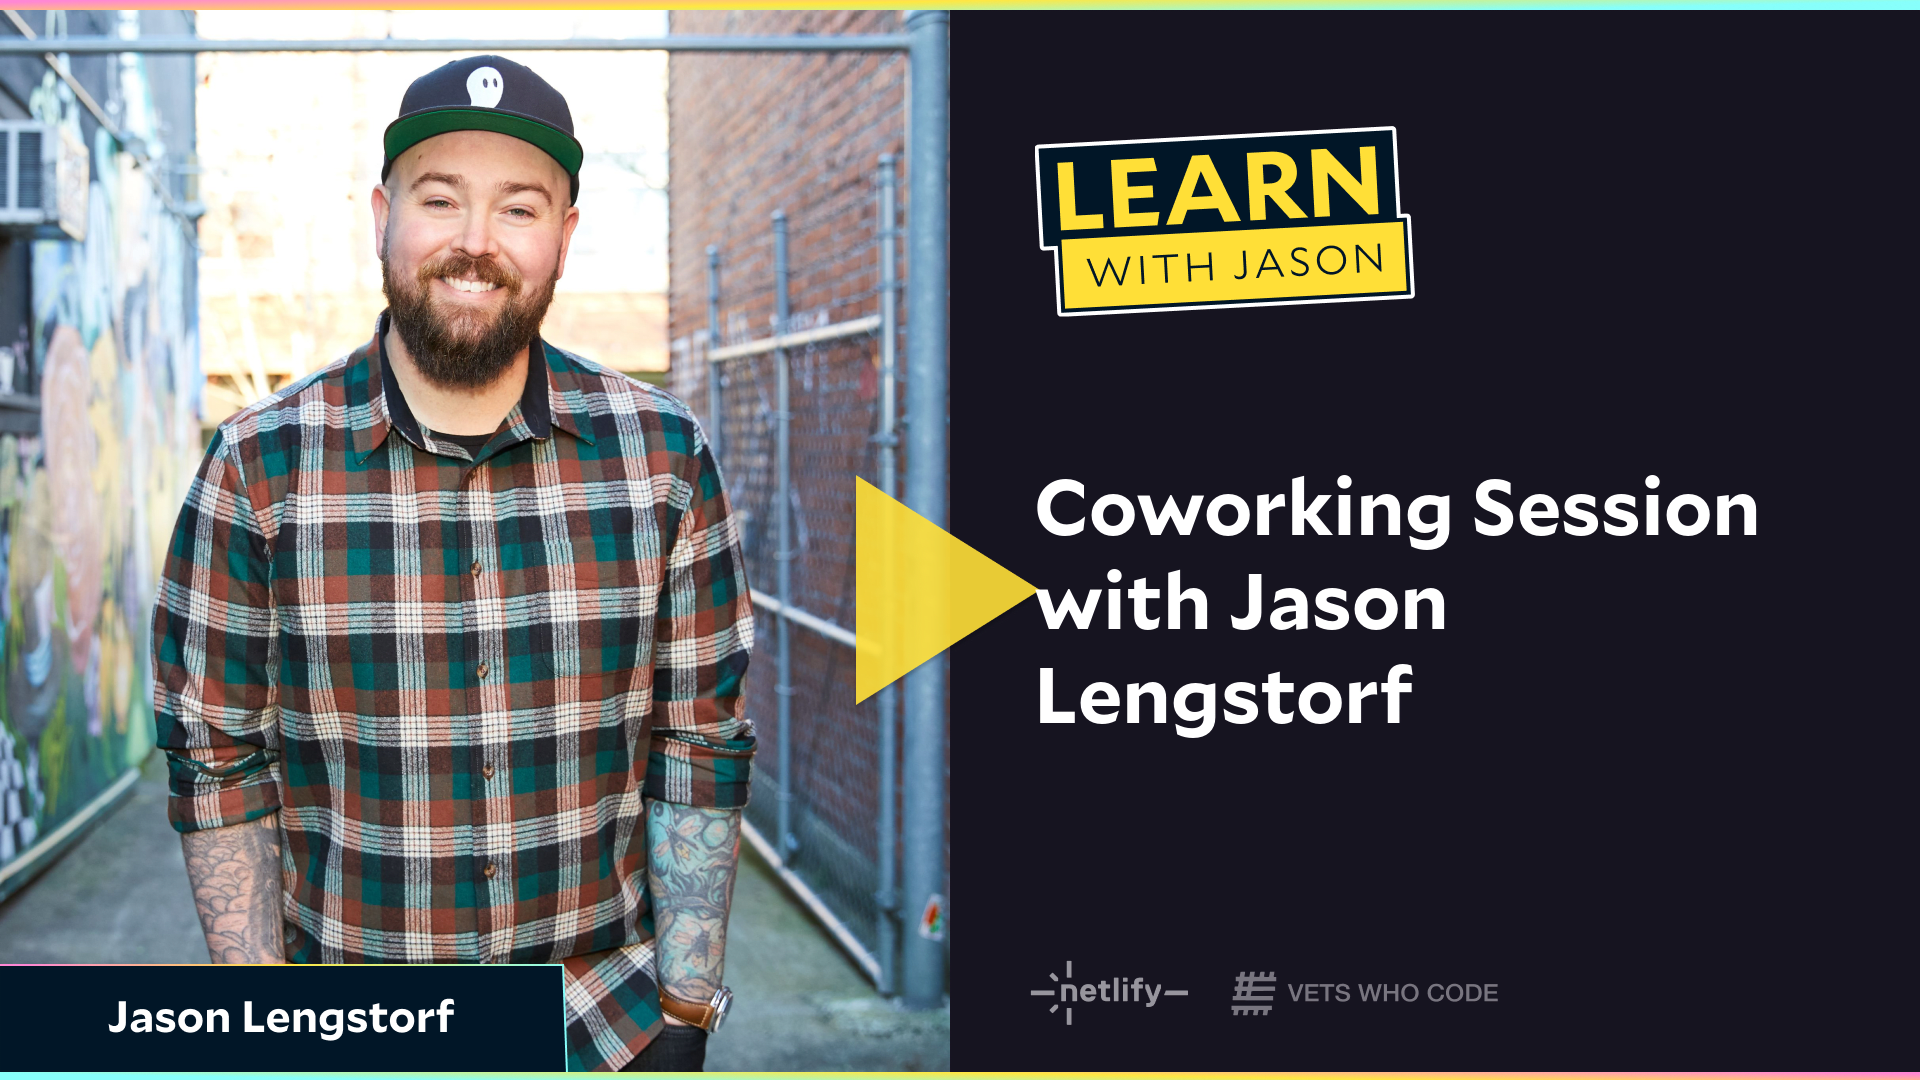 Coworking Session with Jason Lengstorf (with Jason Lengstorf)